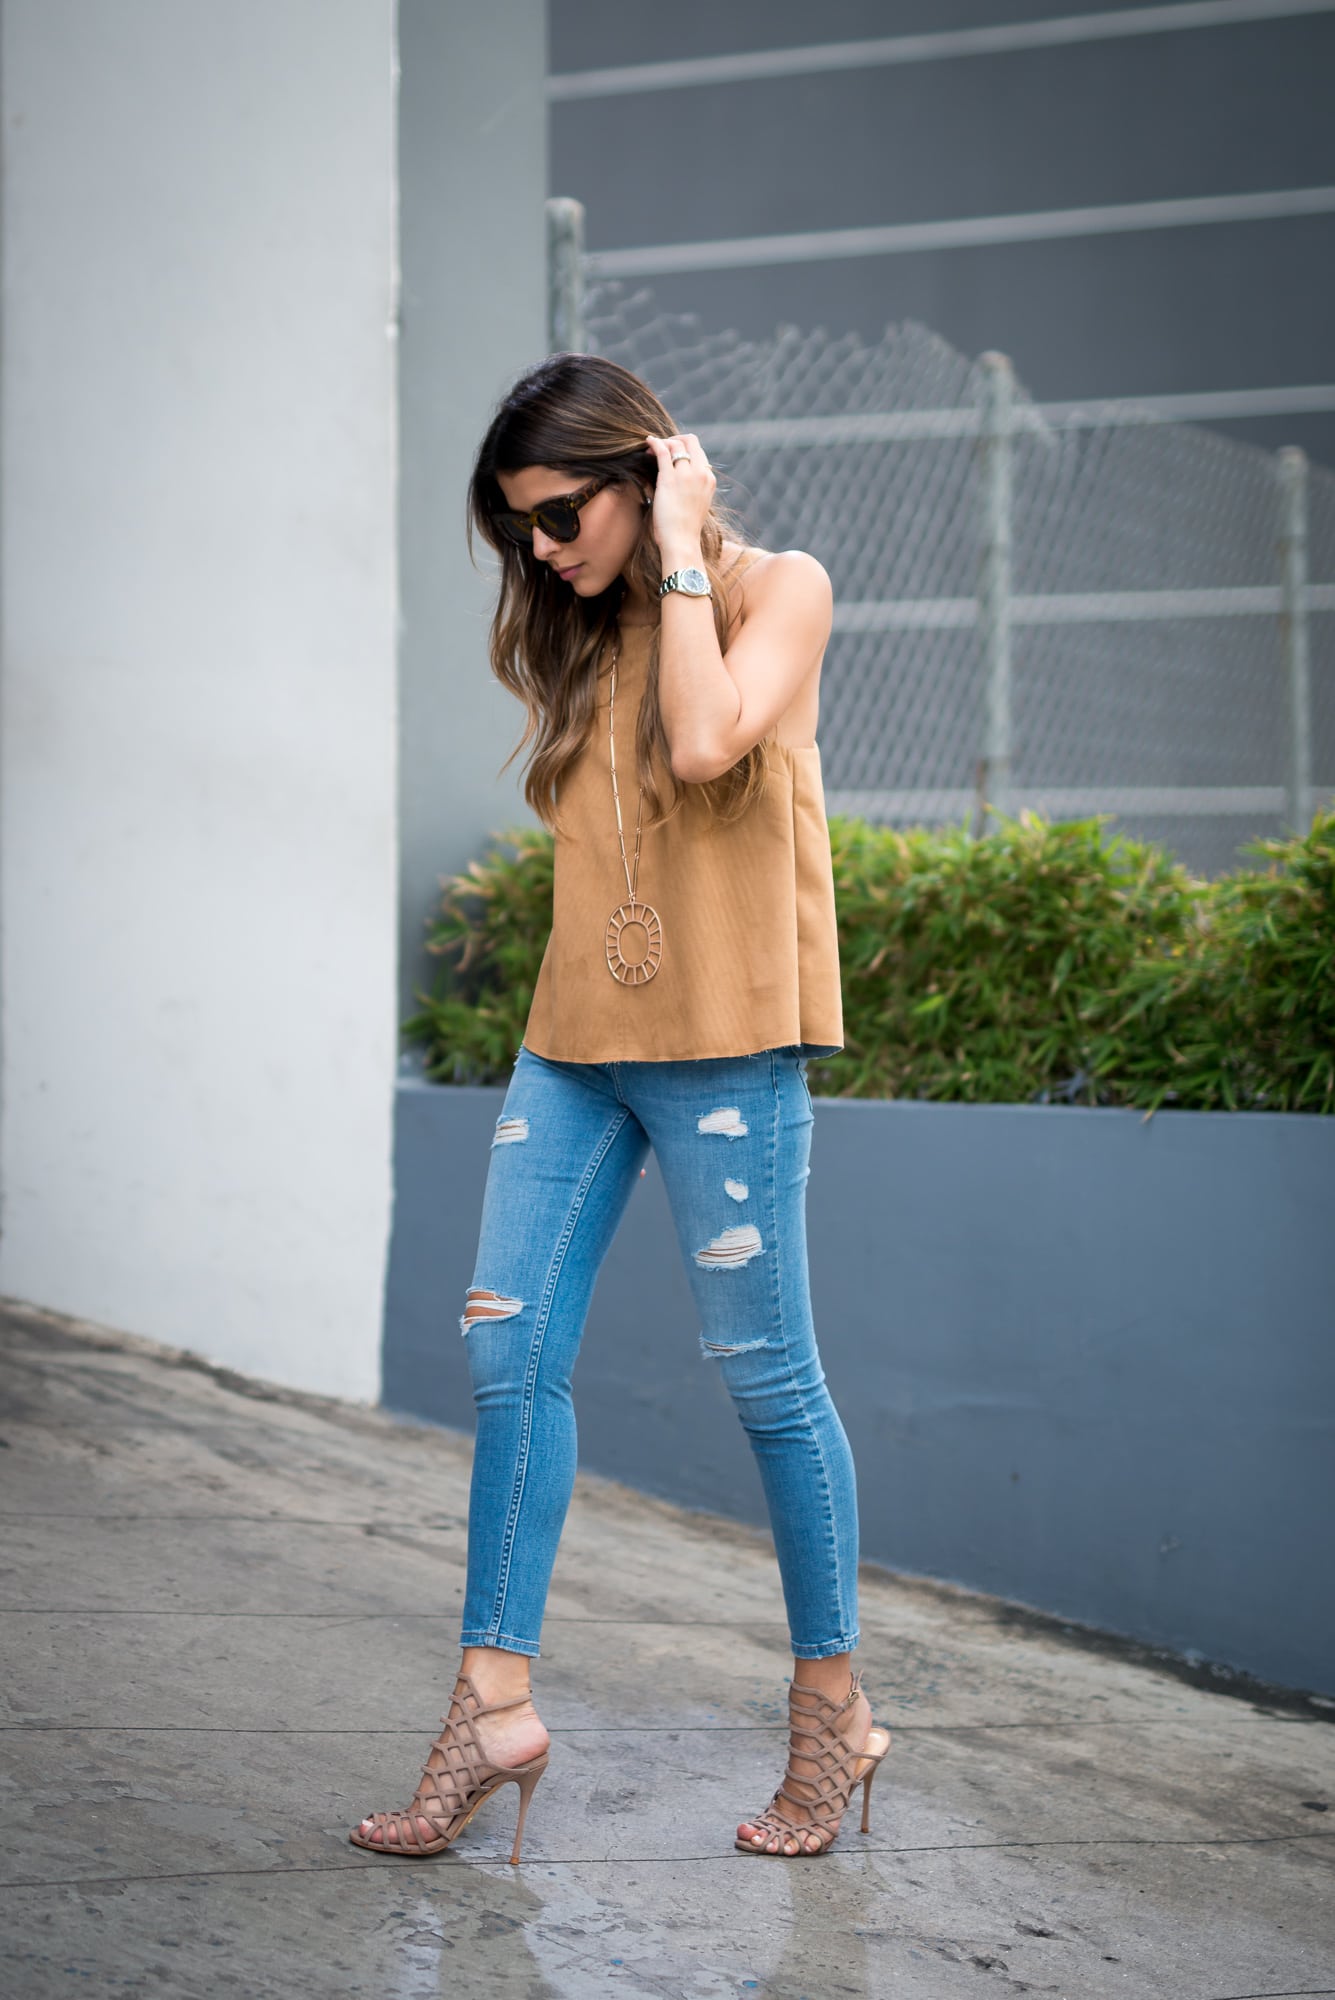 sandals with jeans girl